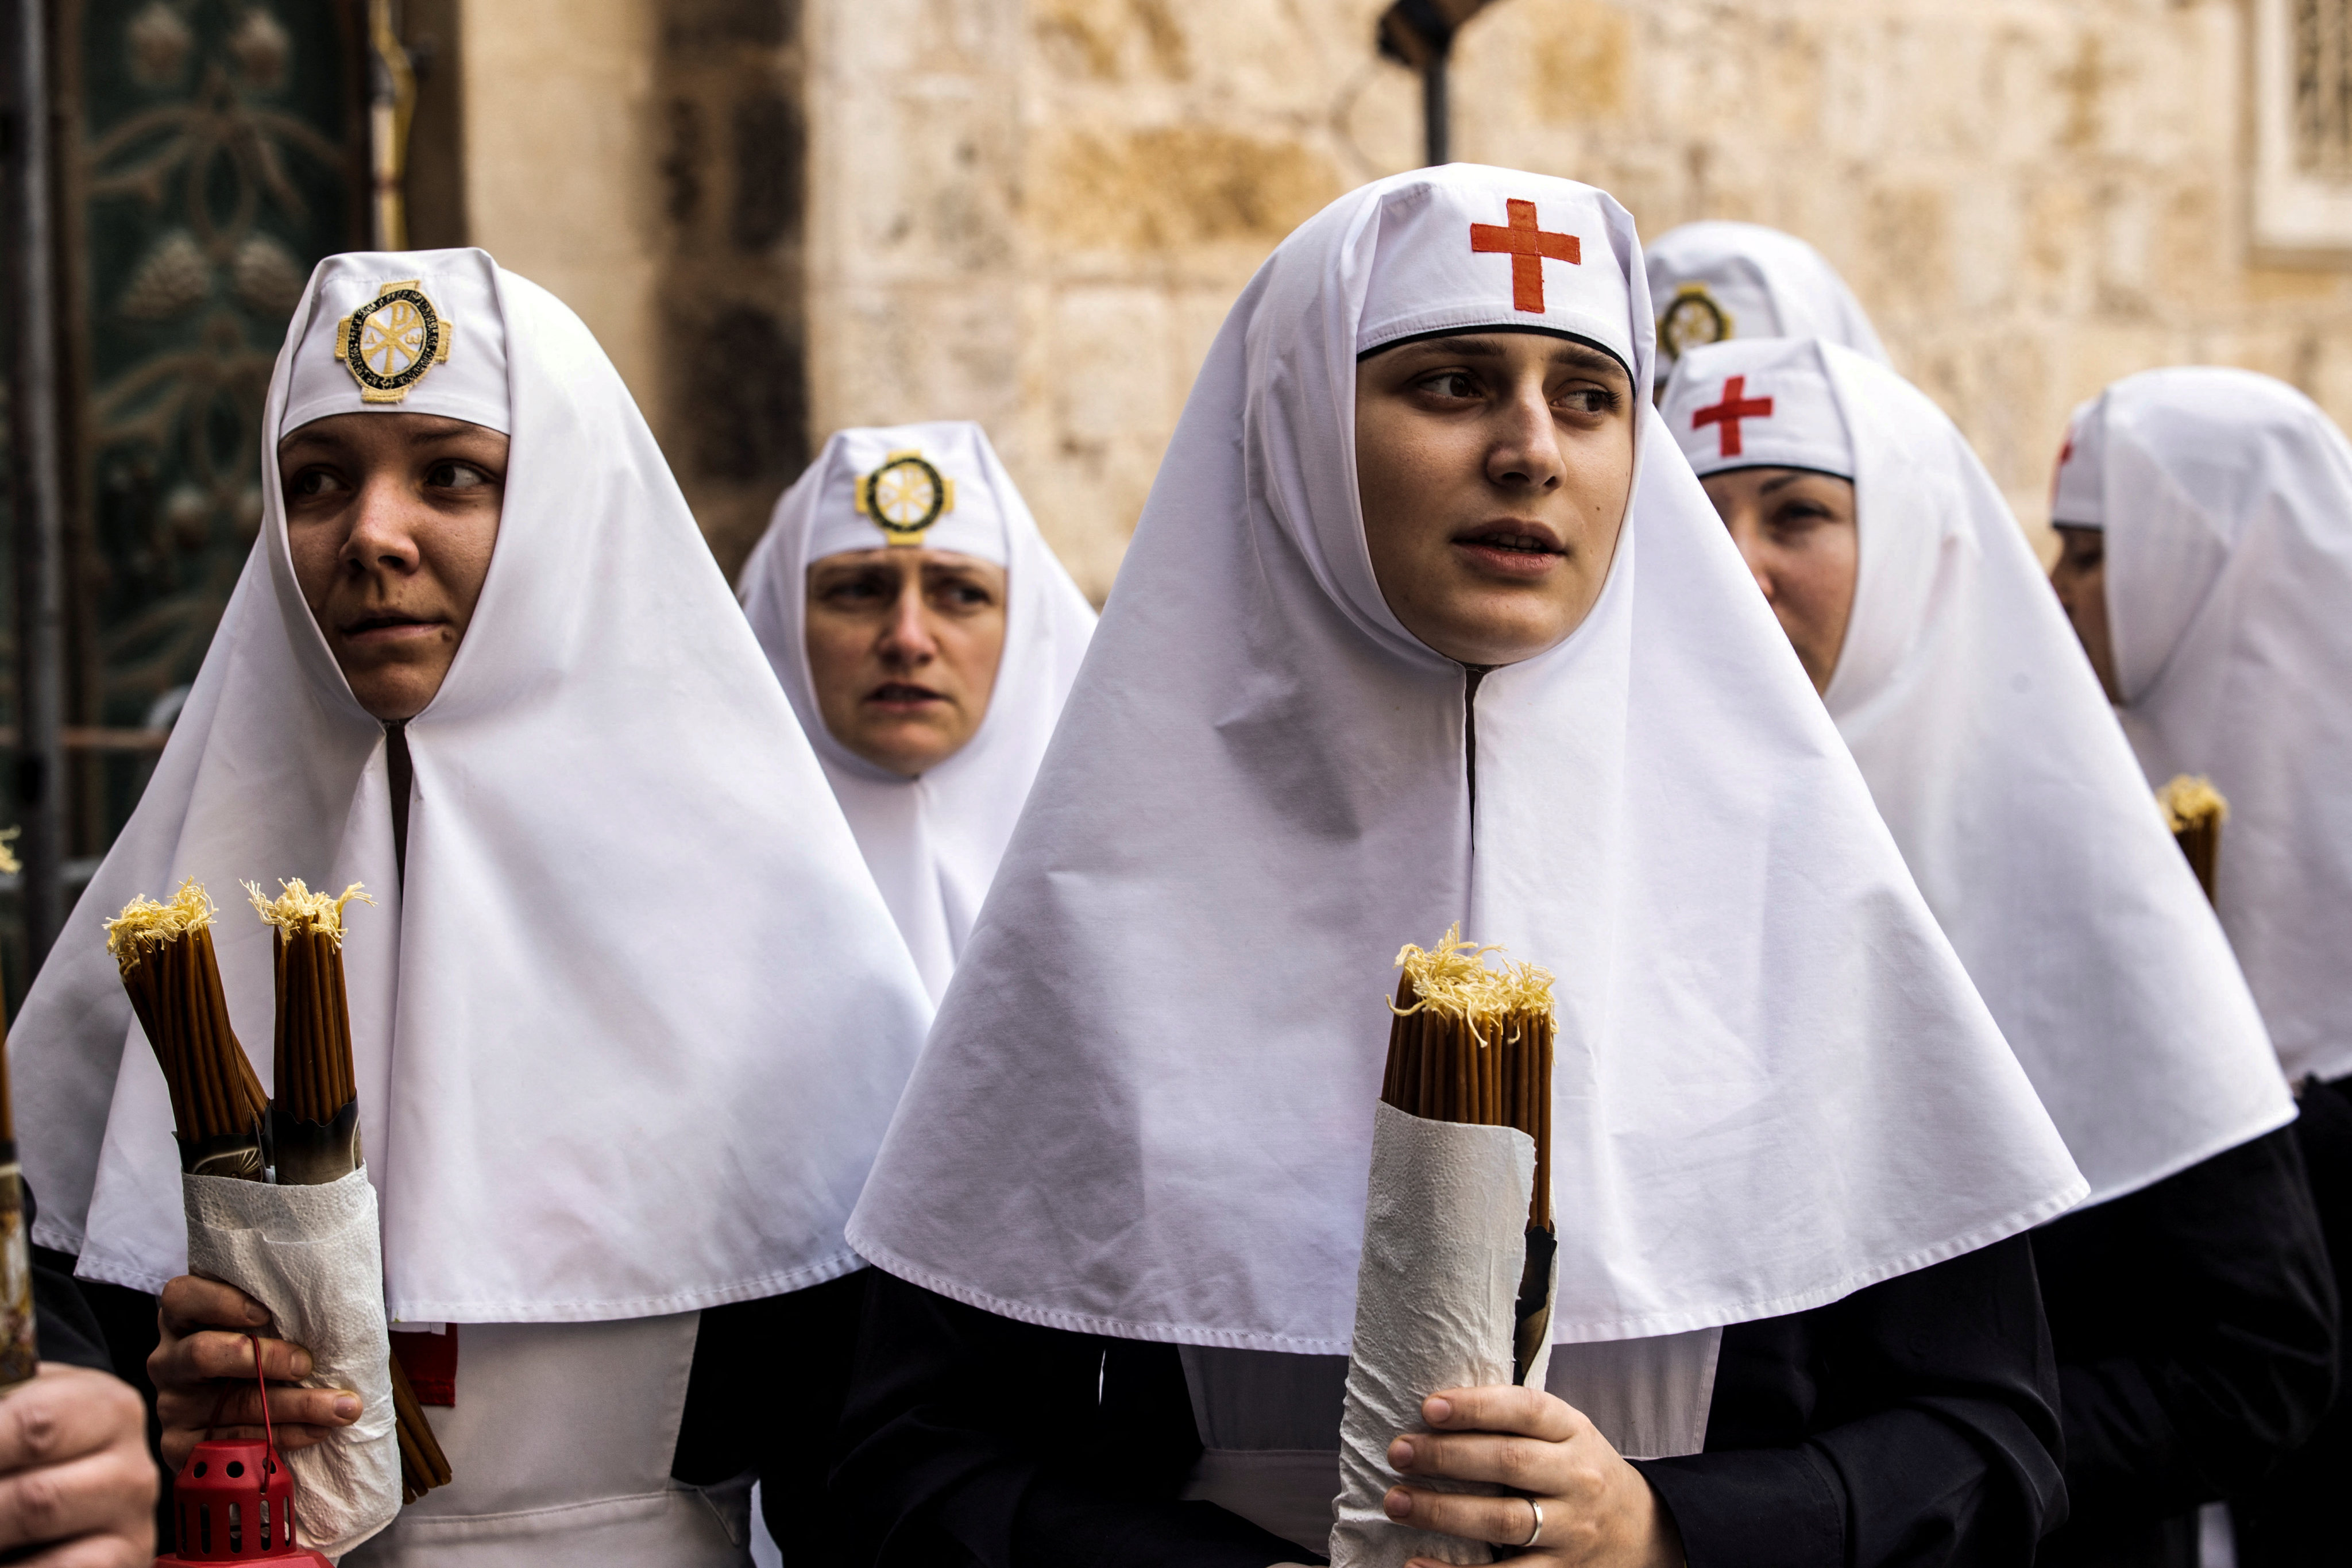 Nuns hold candles as Orthodox Christian worshippers attend the Holy Fire ceremony at the Church of the Holy Sepulchre in Jerusalem’s Old City on Saturday. Photo: Reuters